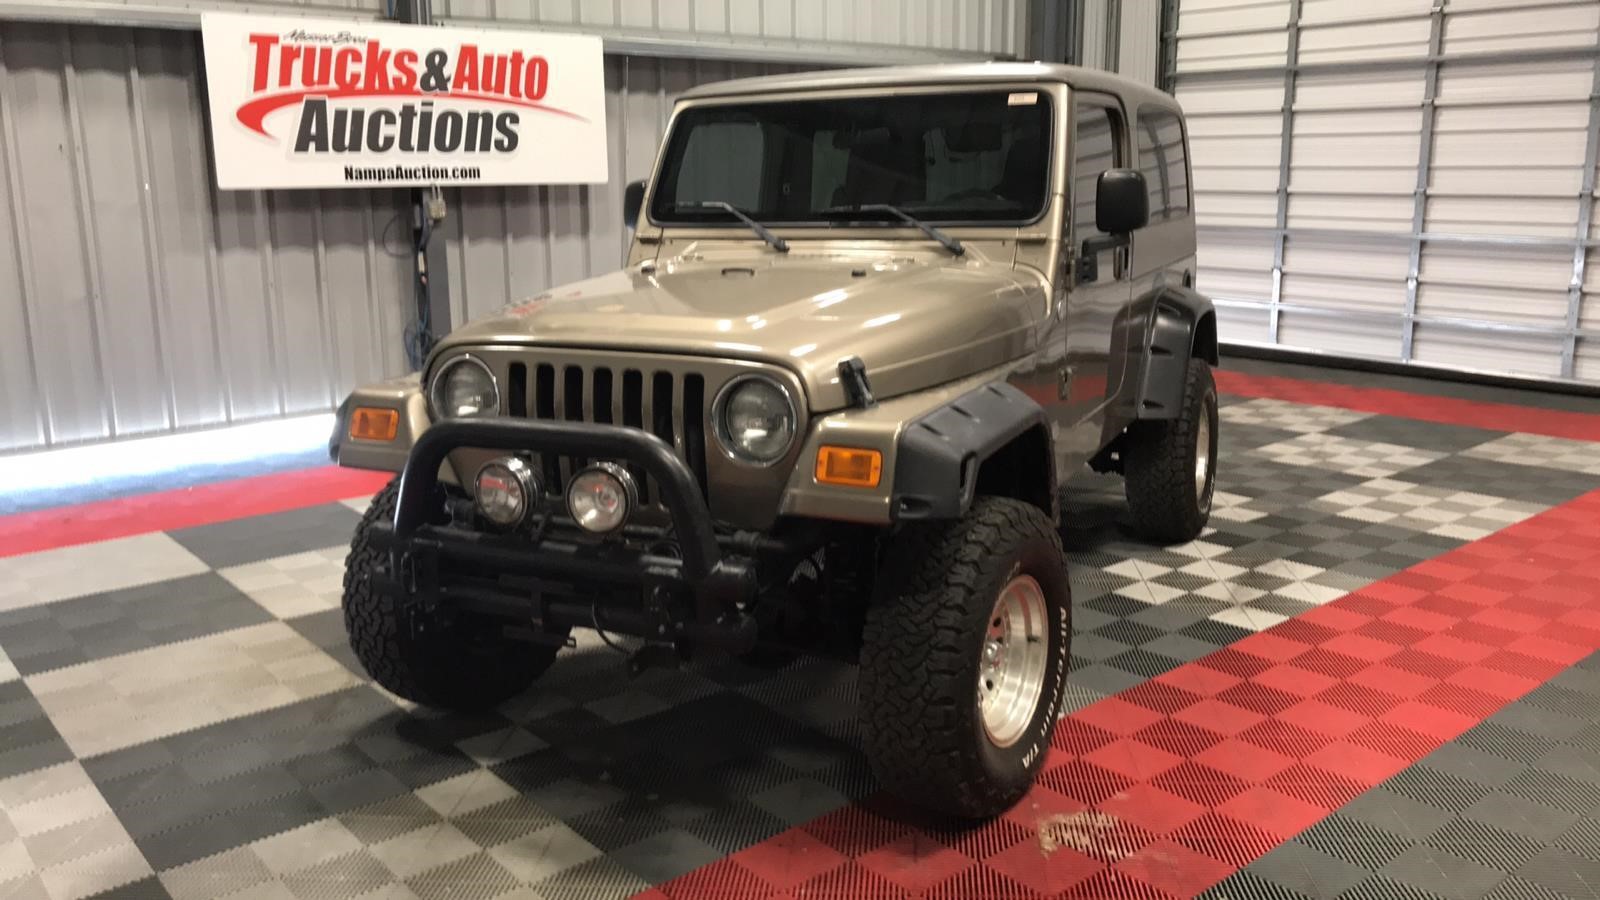 2005 Jeep Wrangler Unlimited | Musser Bros. Inc.